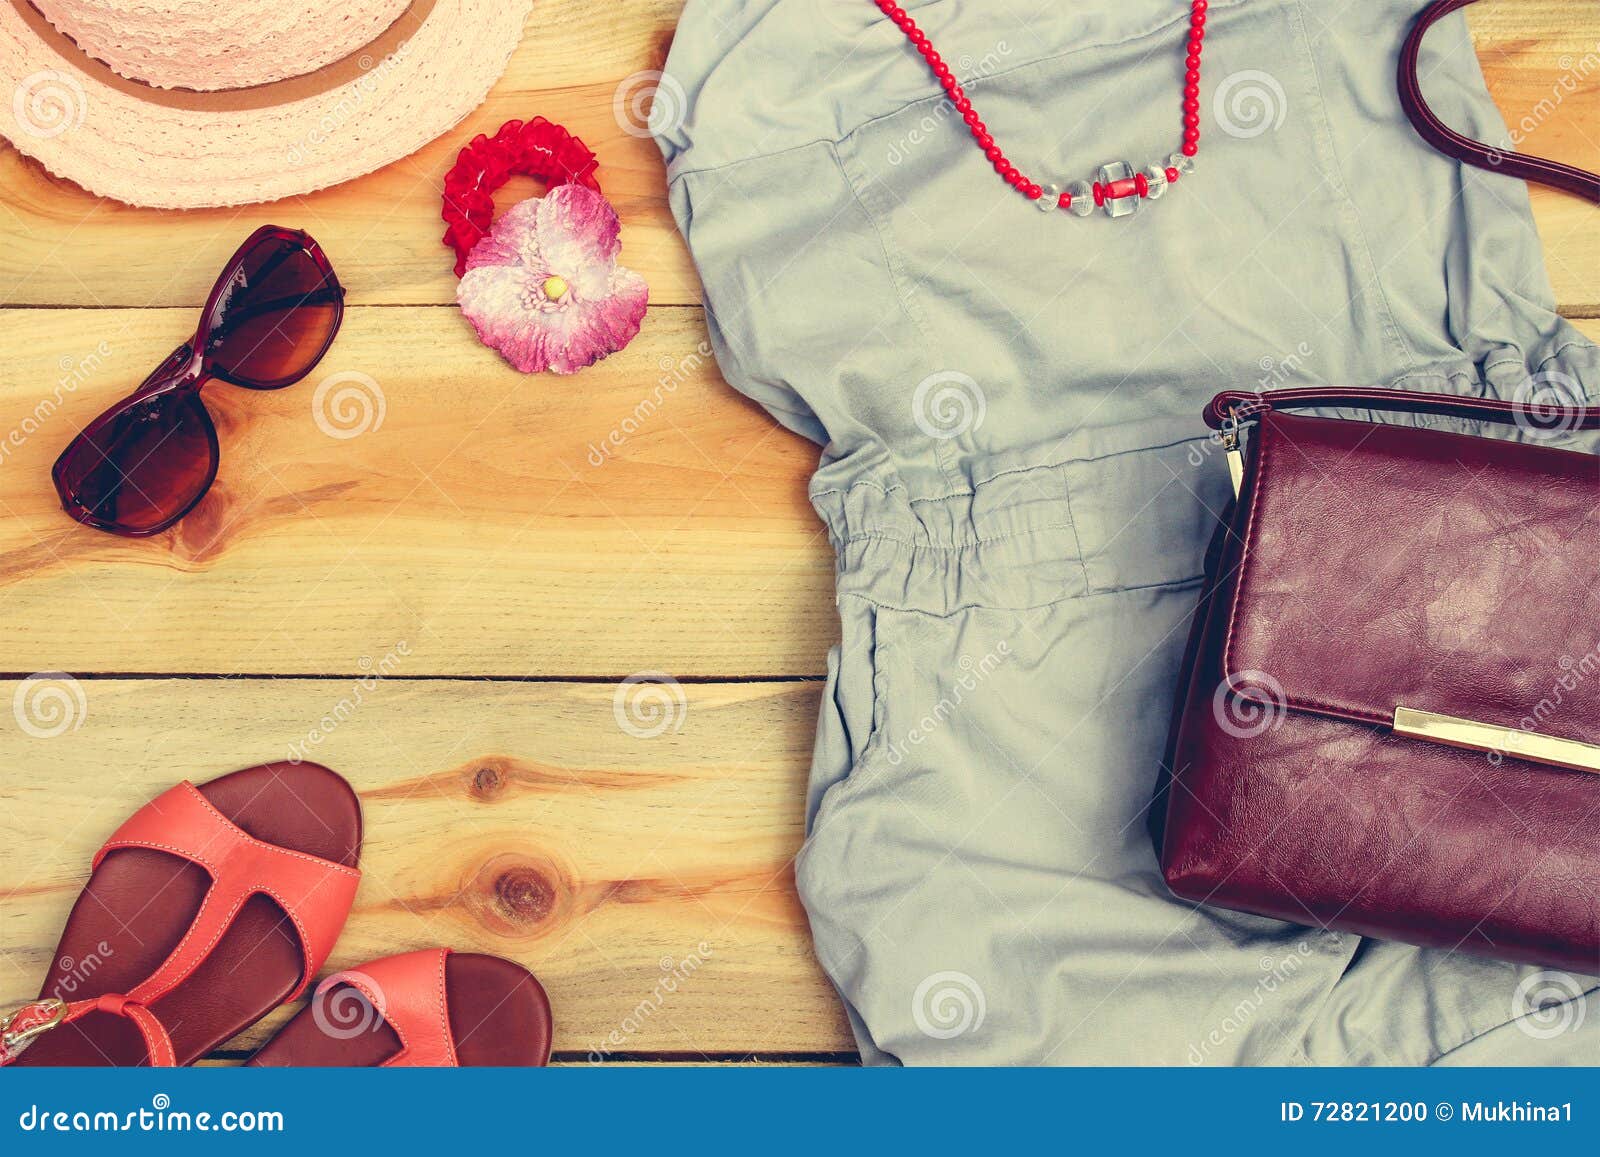 Women S Summer Clothing and Accessories Stock Photo - Image of outfit ...